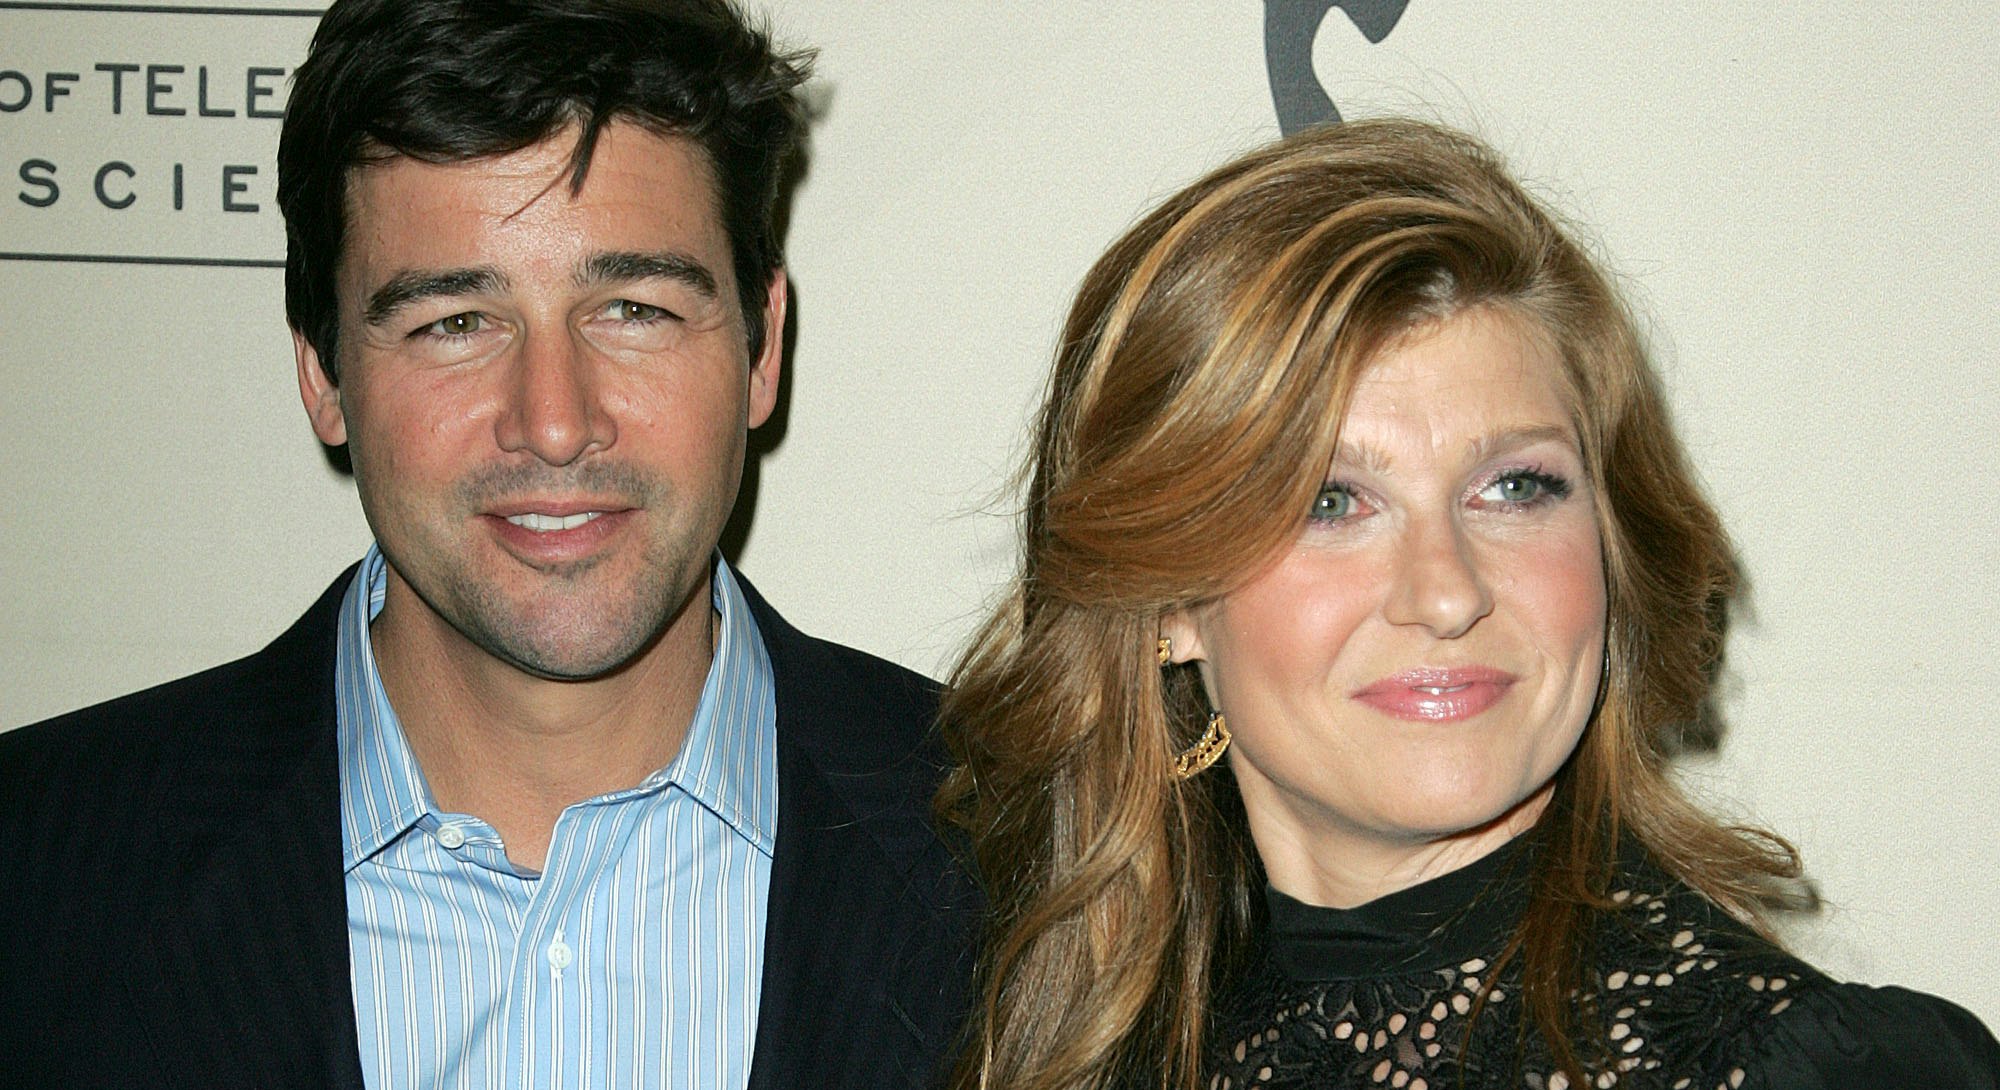 NORTH HOLLYWOOD, CA - JANUARY 31:  Actor Kyle Chandler and actress Connie Britton at "An Evening wit...